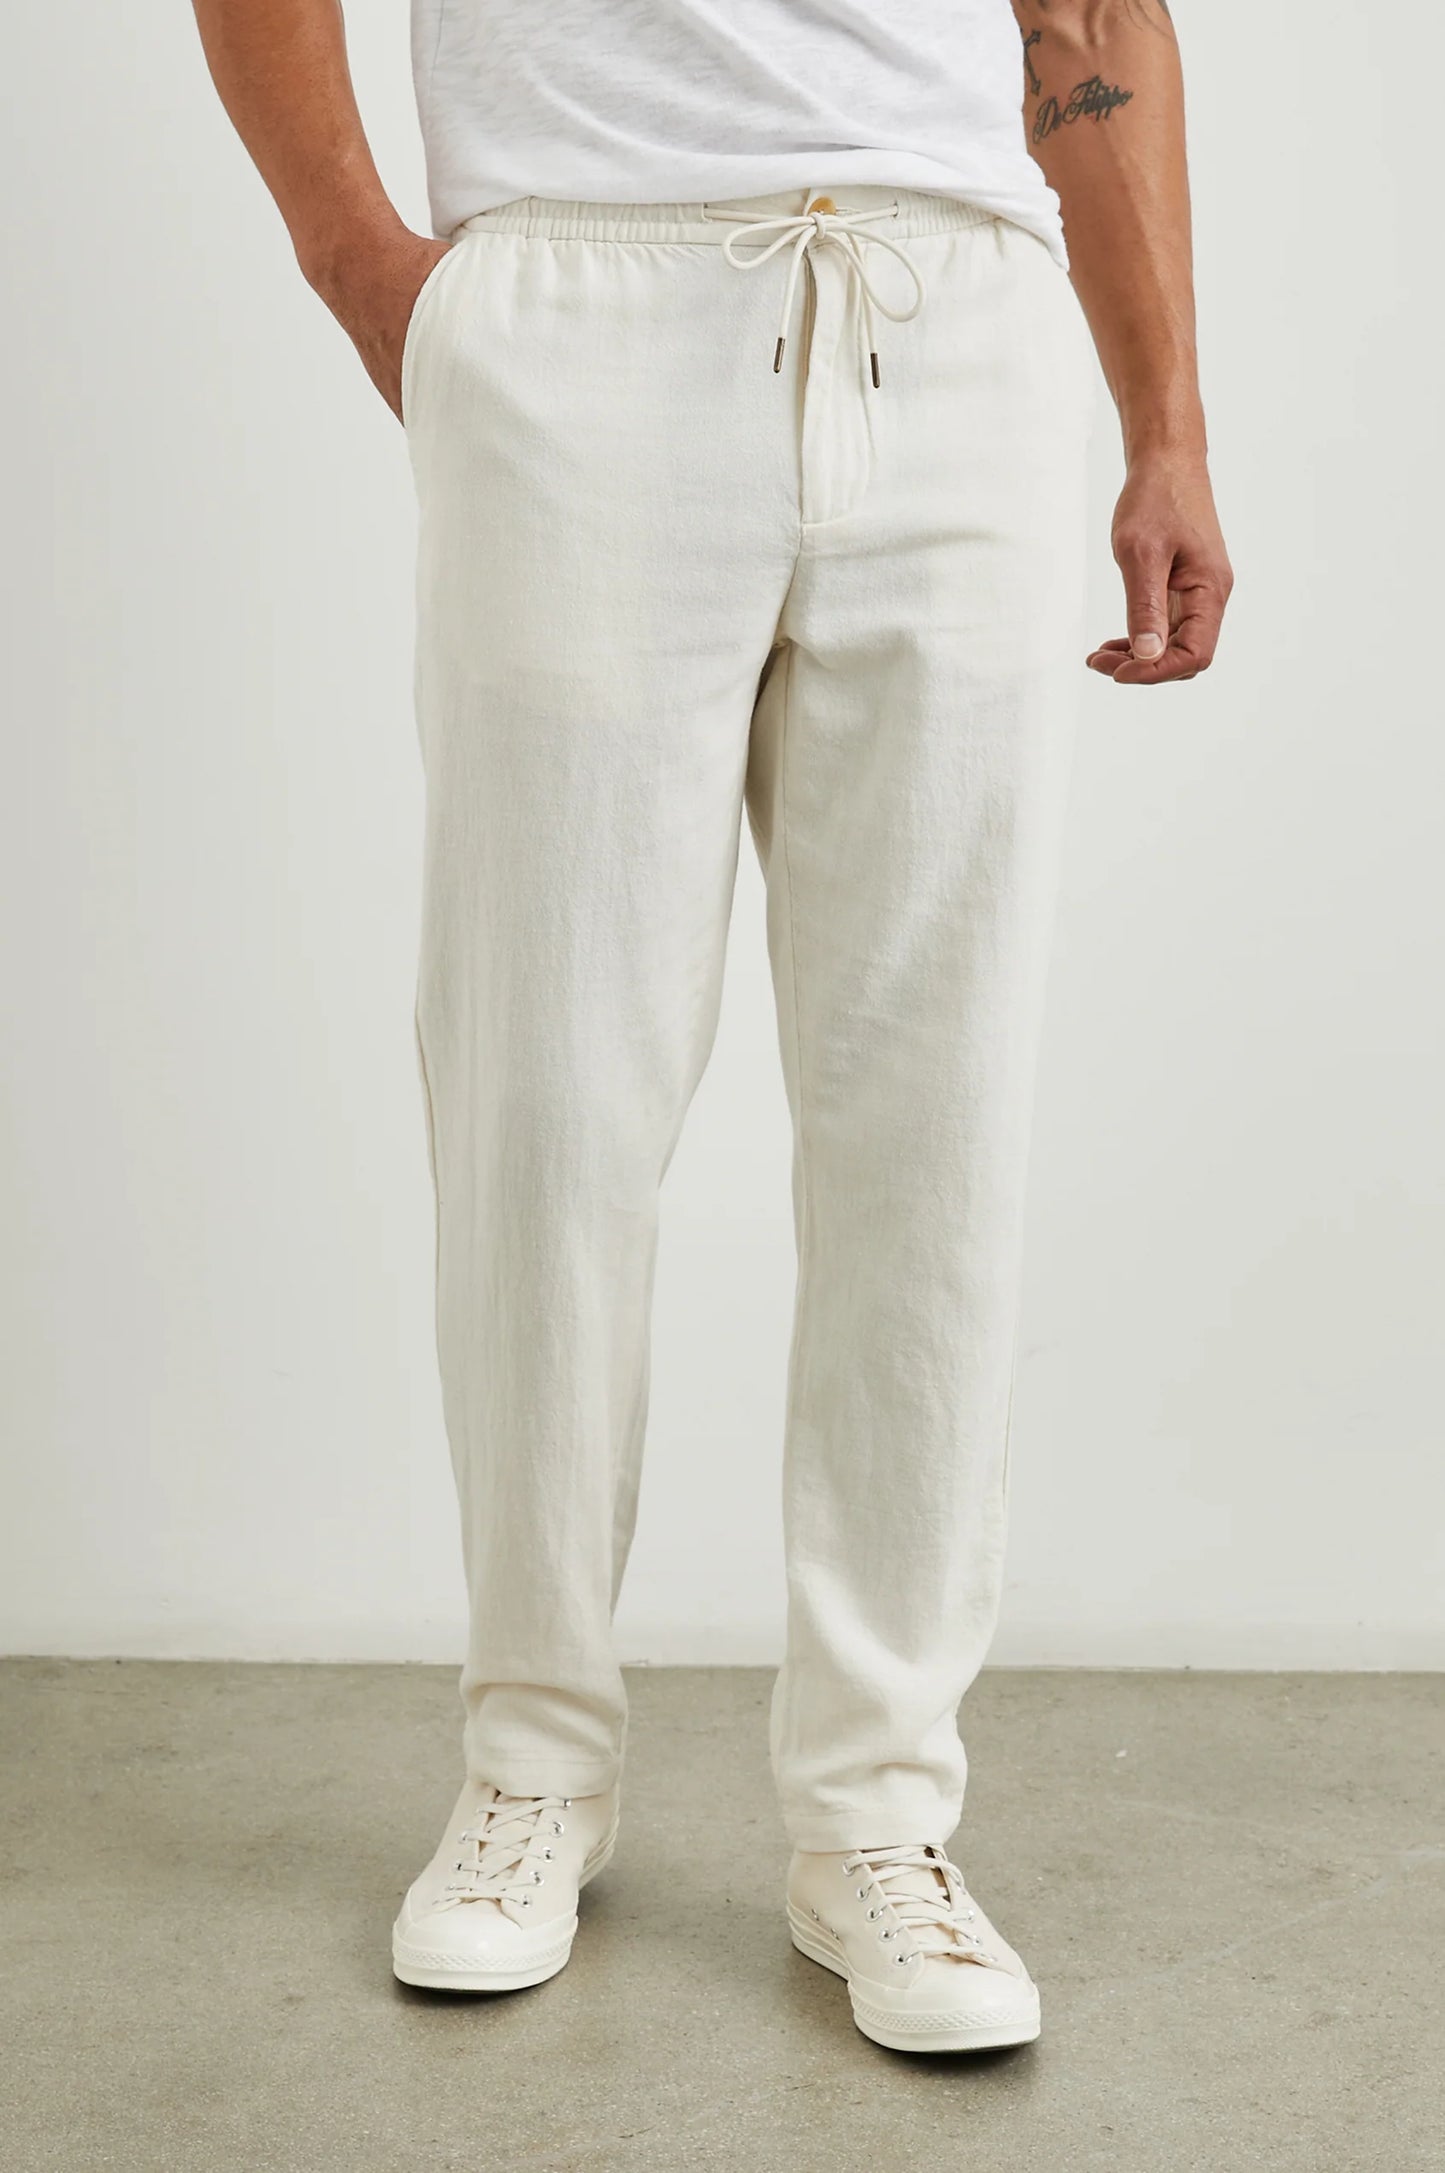 Front view of the Callum Drawstring Men's Pant in the color Ecru by Rails